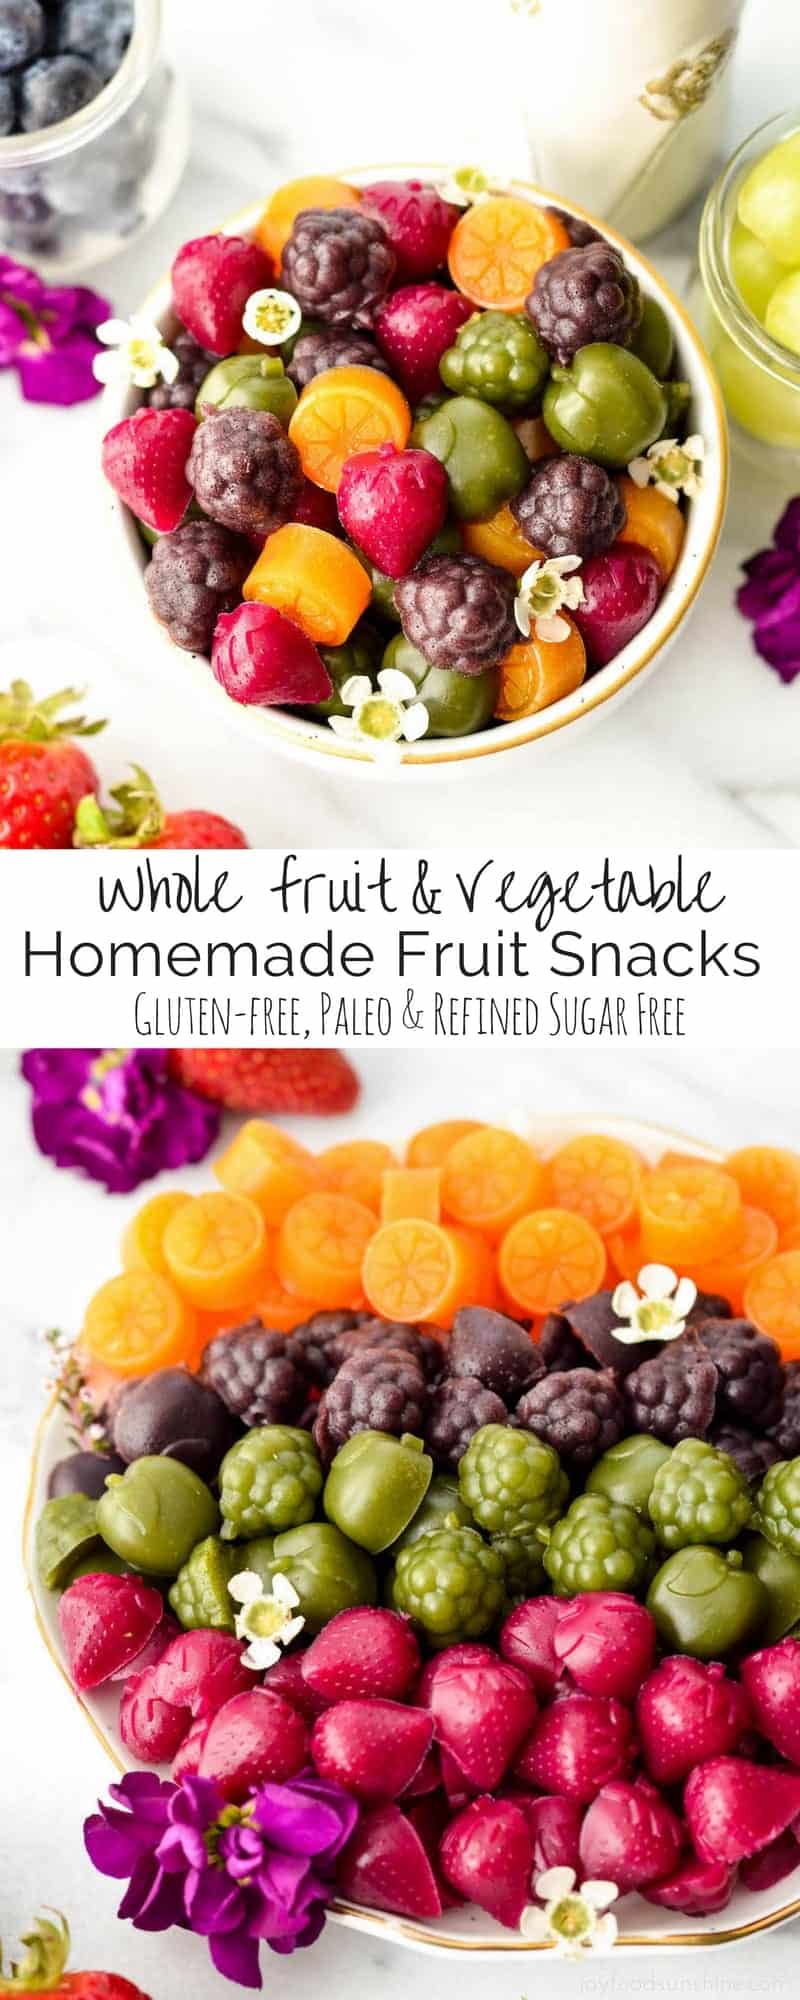 Healthy Homemade Fruit Snacks (with Whole Fruits & Veggies